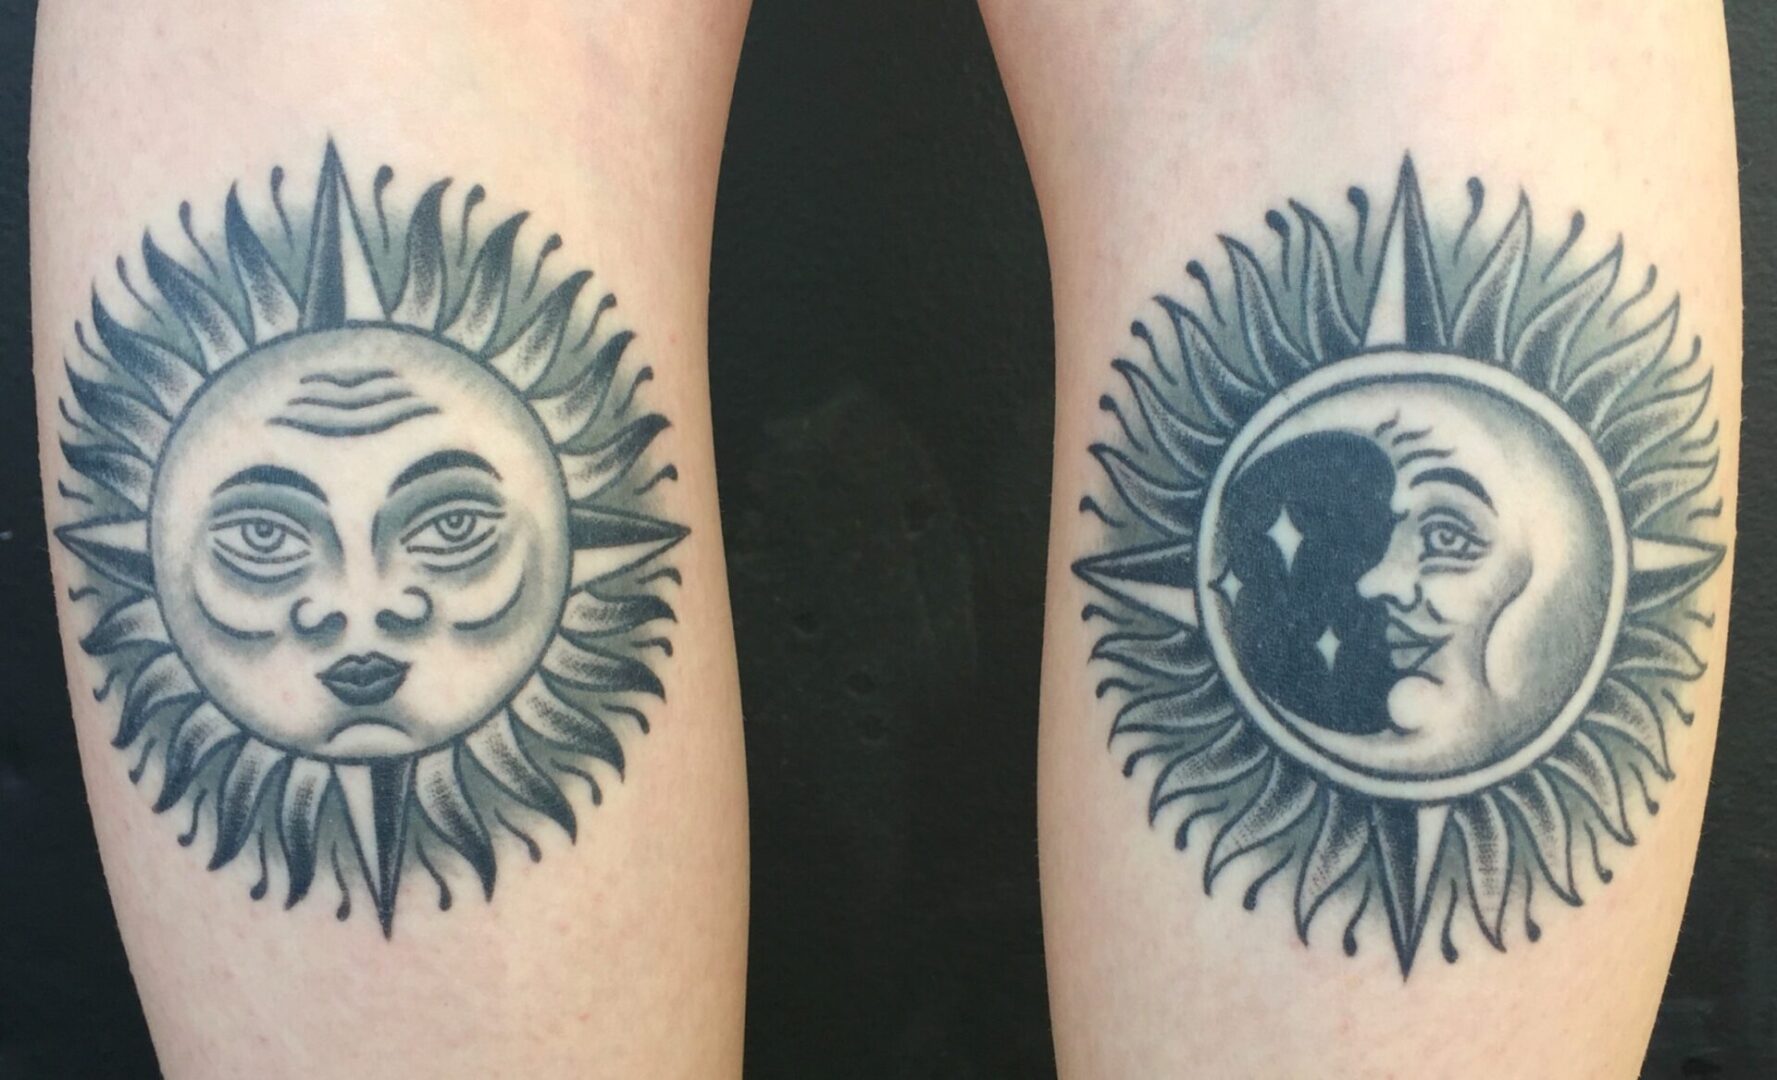 A couple of tattoos that are on each other